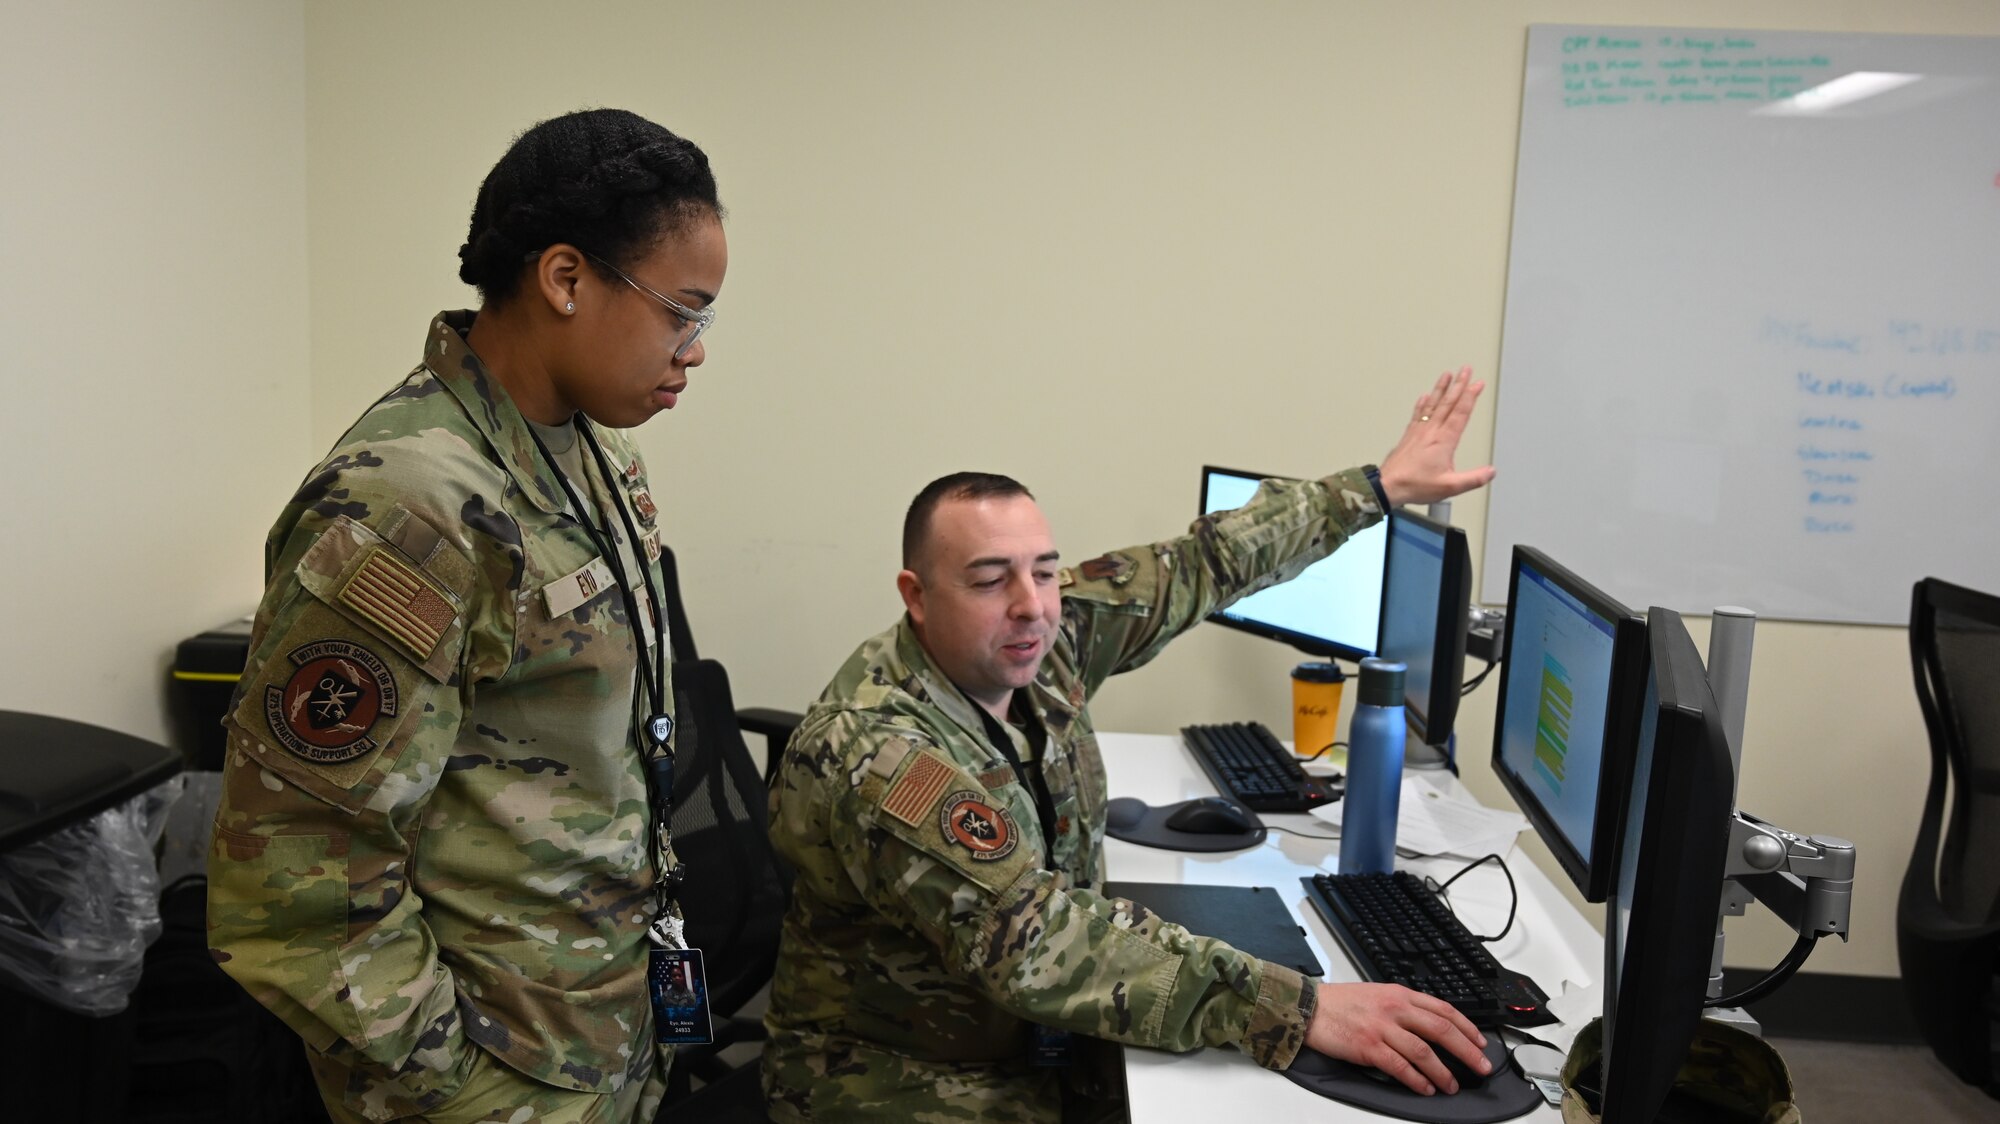 U.S. Air Force 1st Lt. Alexis Eyo (left), cyber officer assigned to the 275th Operations Support Squadron, and U.S. Air Force Maj. Charles Gruver, 275th Operations Support Squadron commander, talk about strategies before the start of Cyber Blitz 22-3 at Warfield Air National Guard Base, Middle River, Maryland on March 23, 2022.